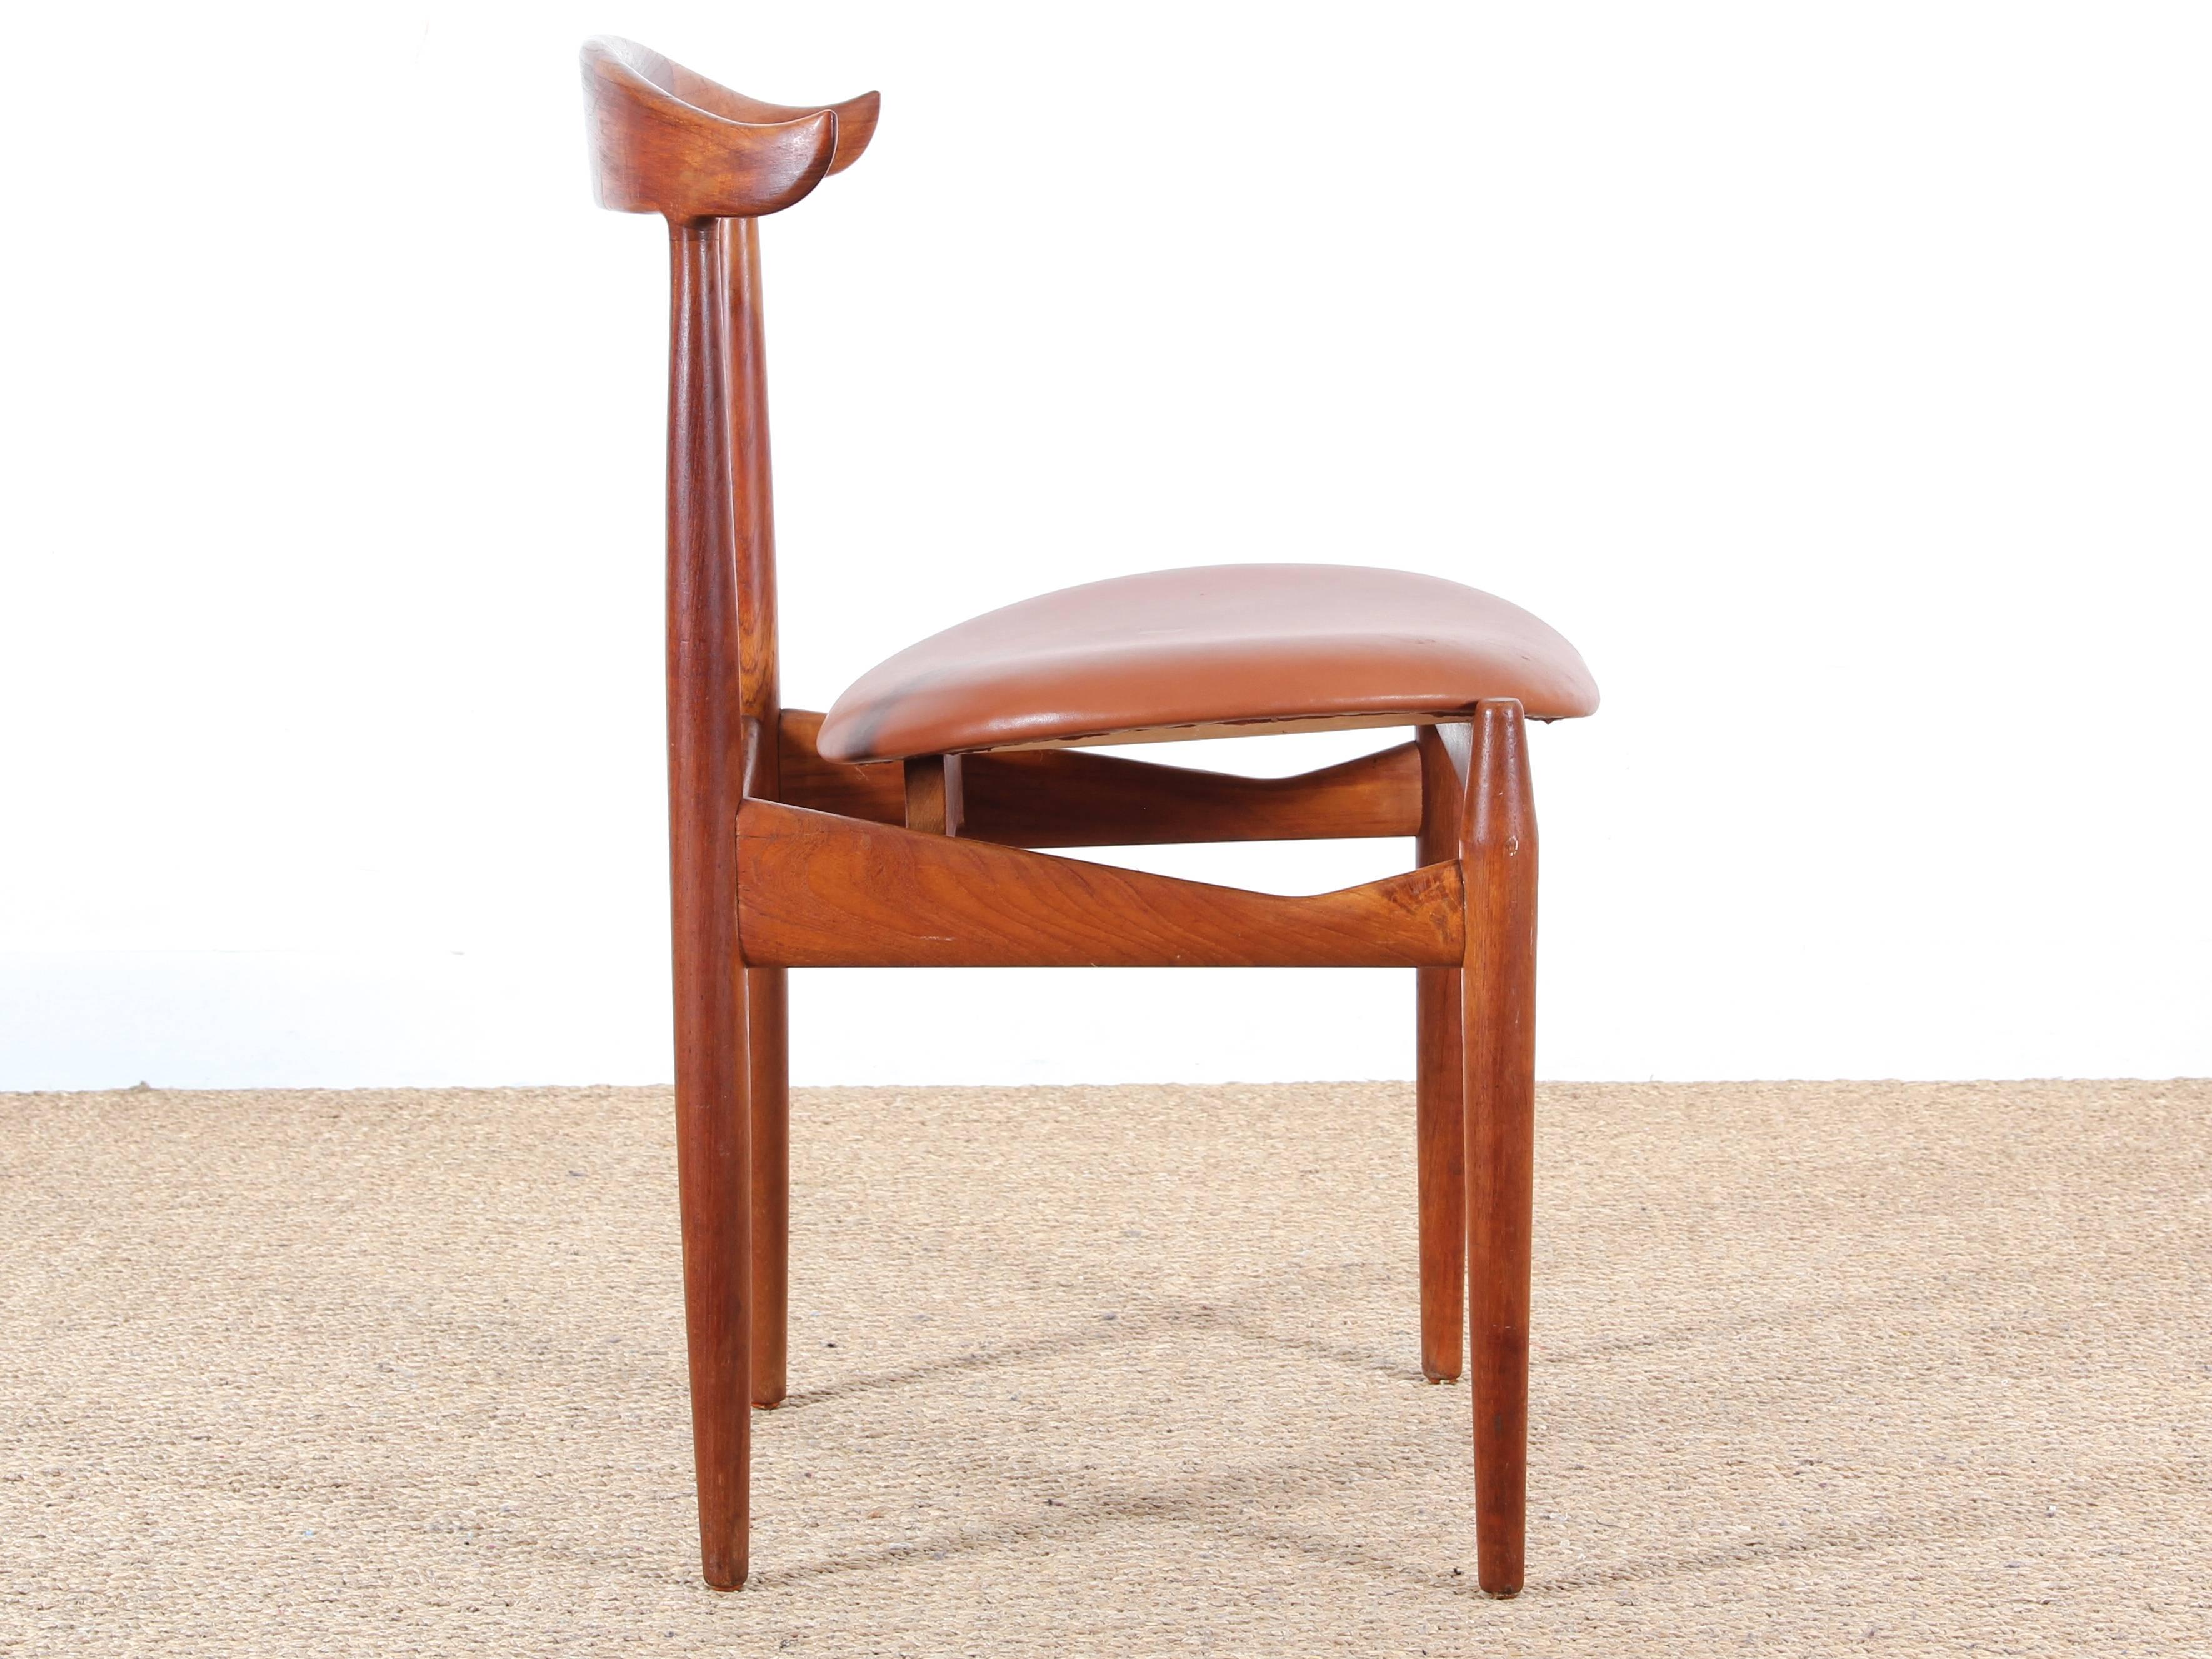 Rare Danish teak chair of Knud Faerch Slagelse Møbelvaerk. Seated redone and covered with full grain leather untreated.